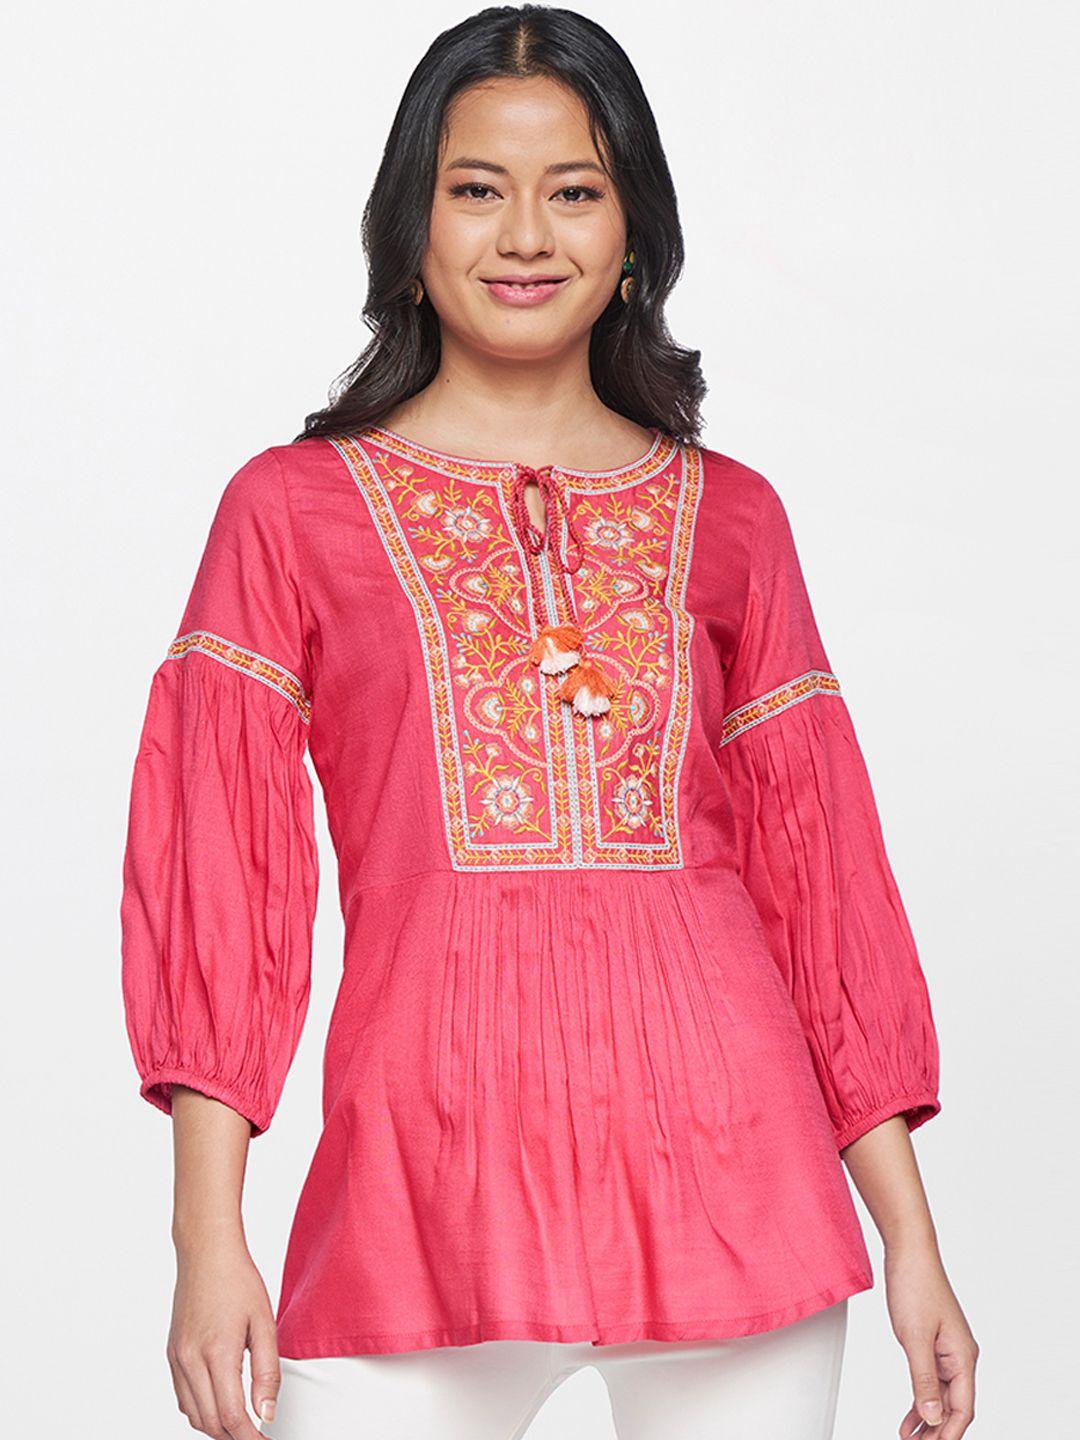 global-desi-pink-floral-embroidered-top